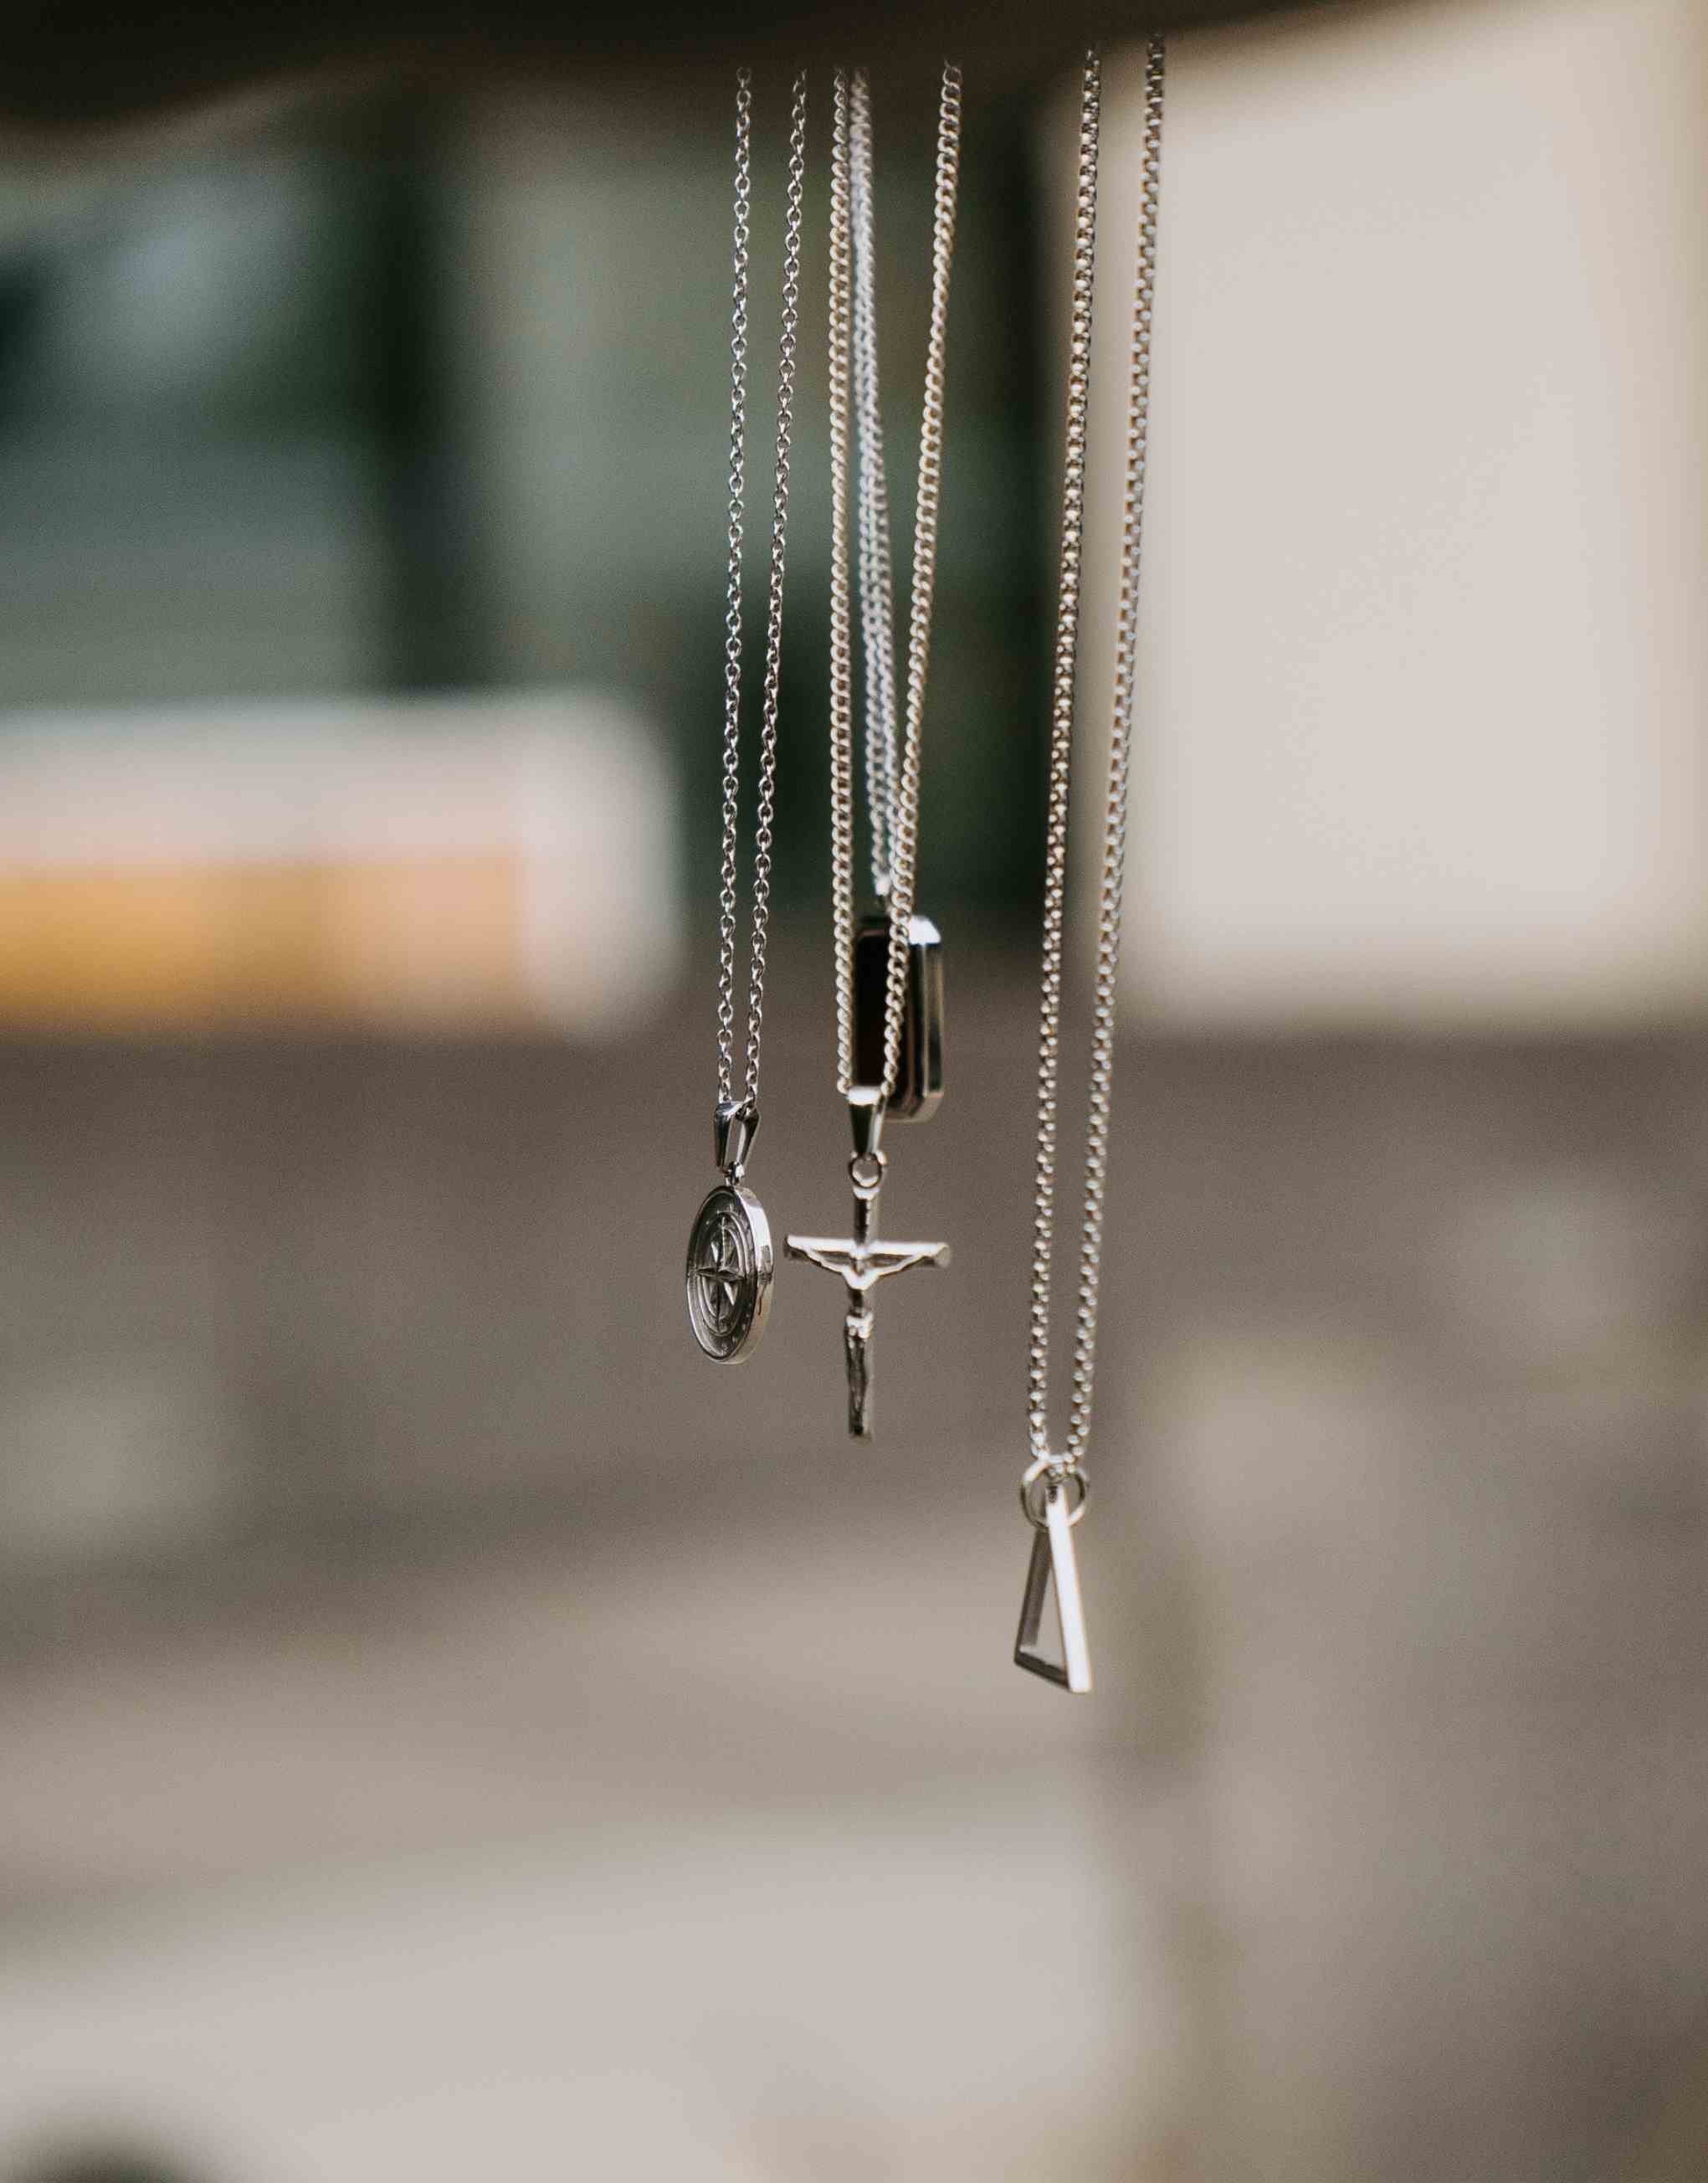 Men's Necklace Pendants | Picking the Right One For You.